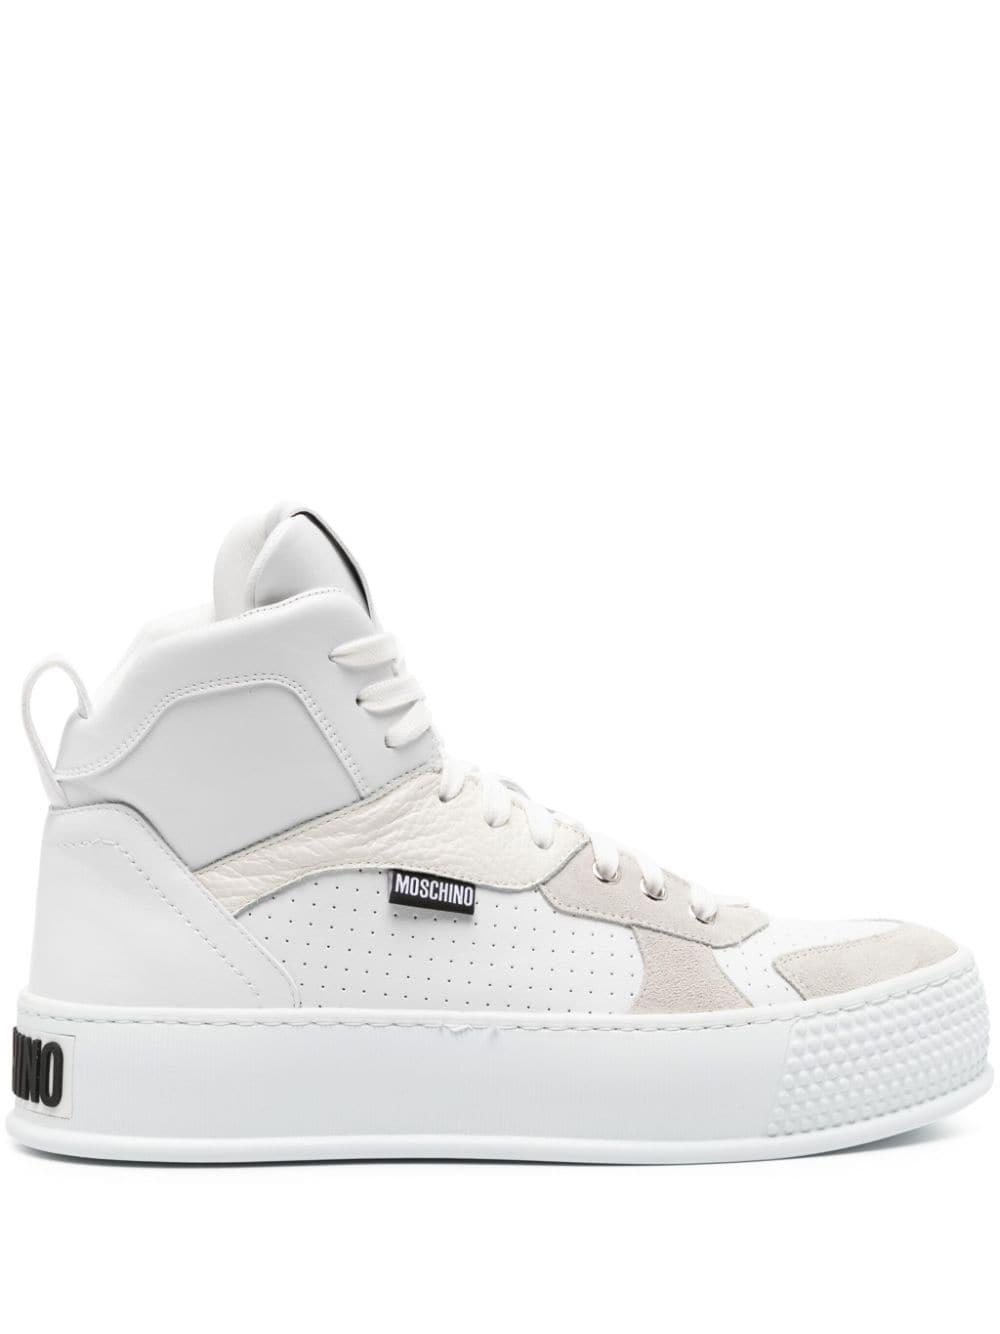 Moschino Bumps & Stripes High-top Sneakers In White